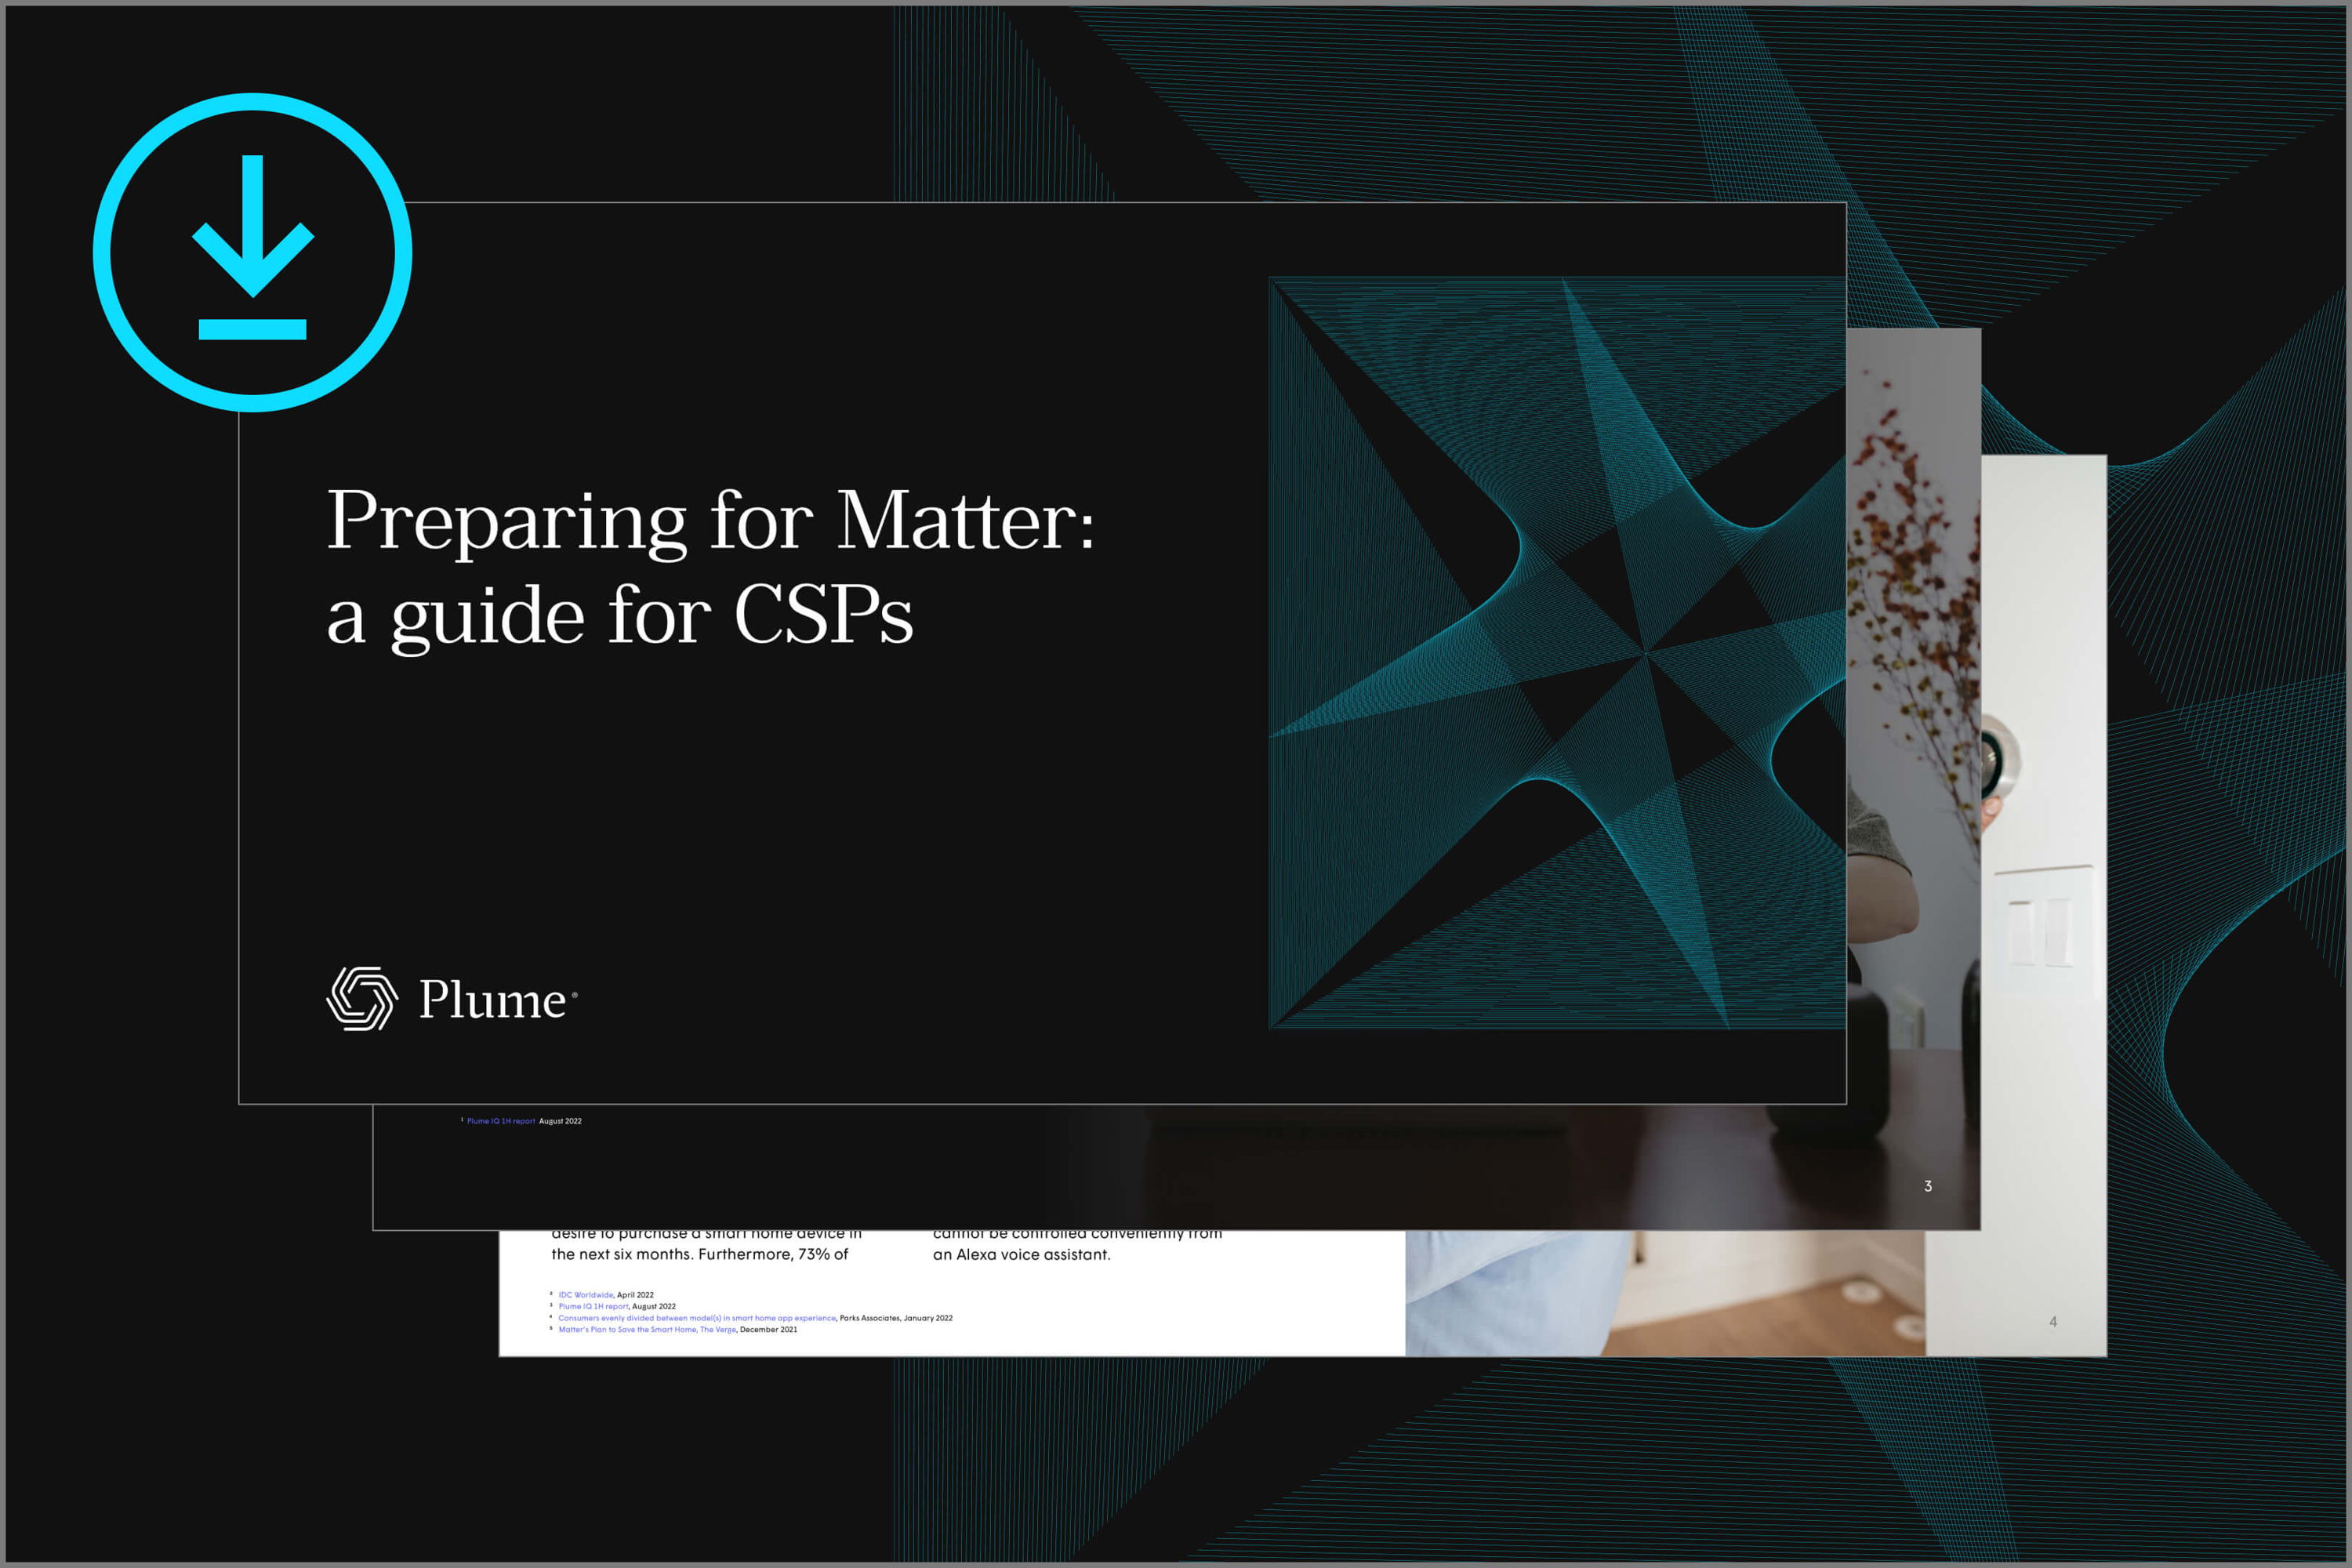 Preparing for Matter: a guide for CSPs